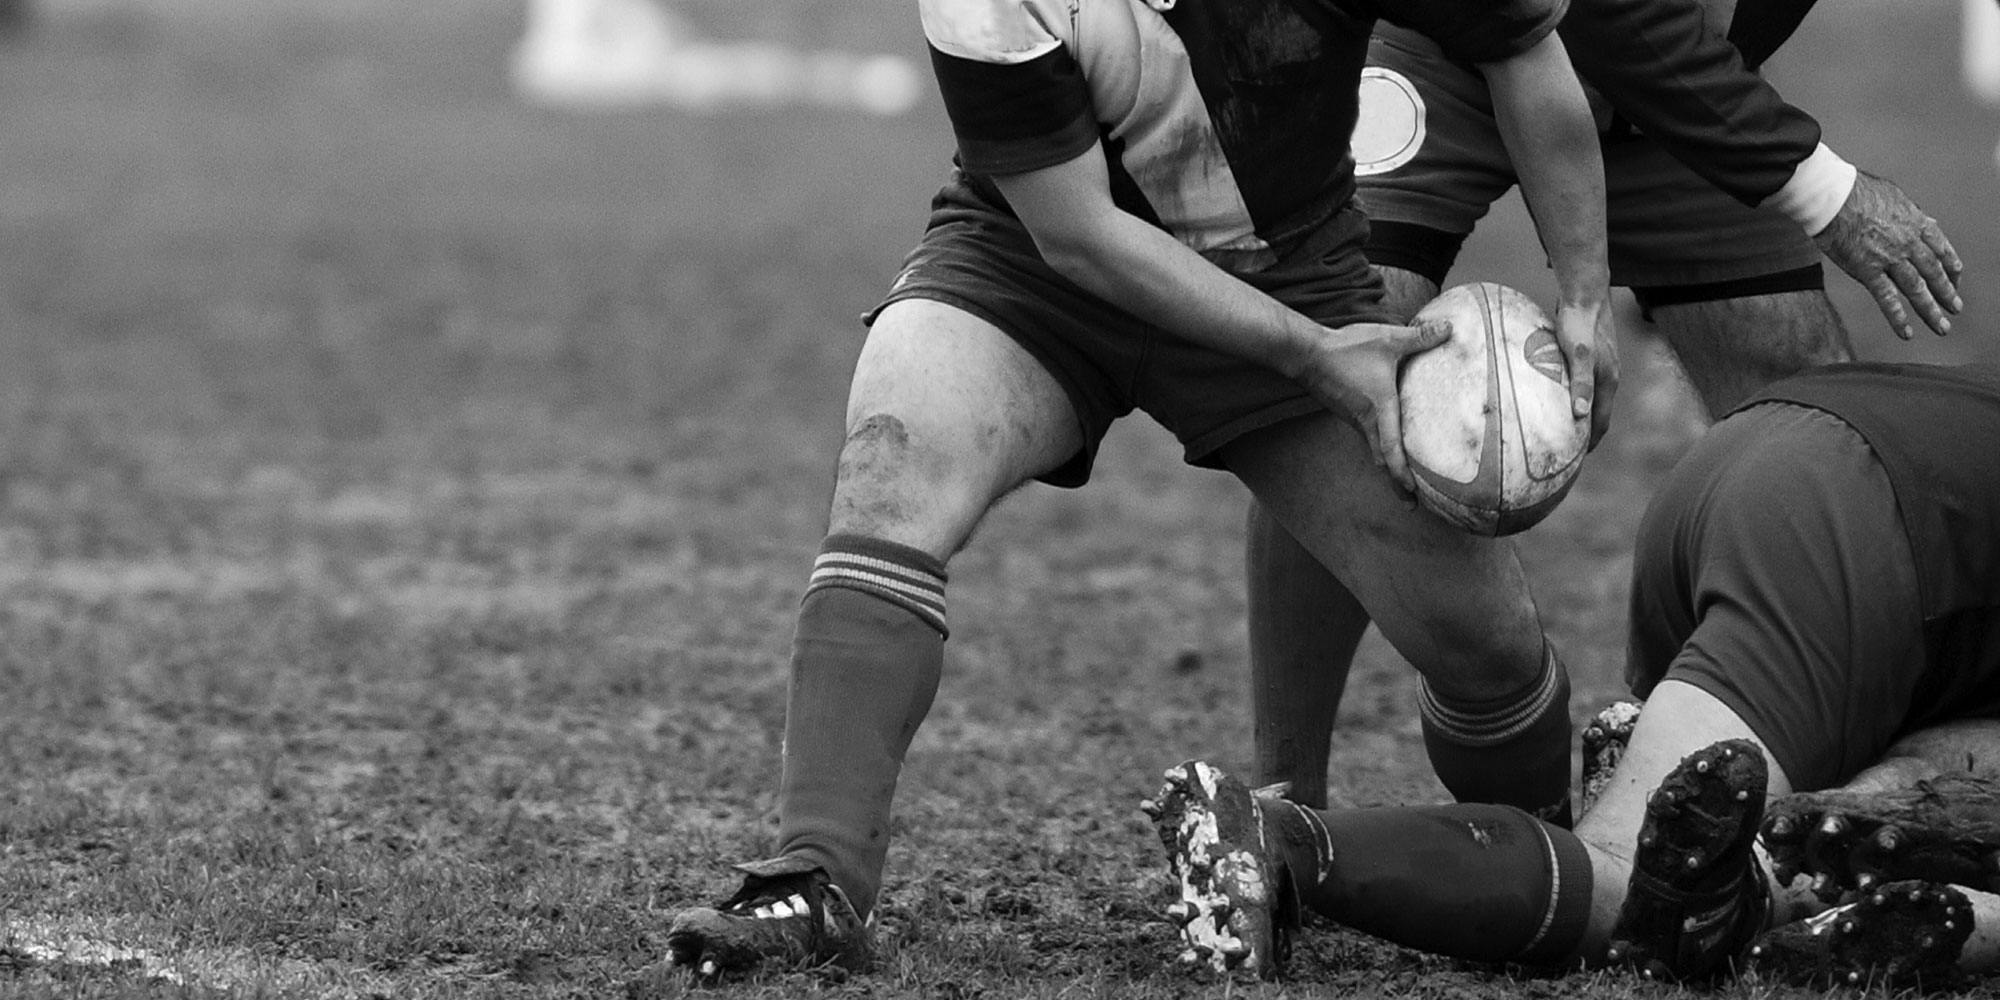 A rugby player passes the ball